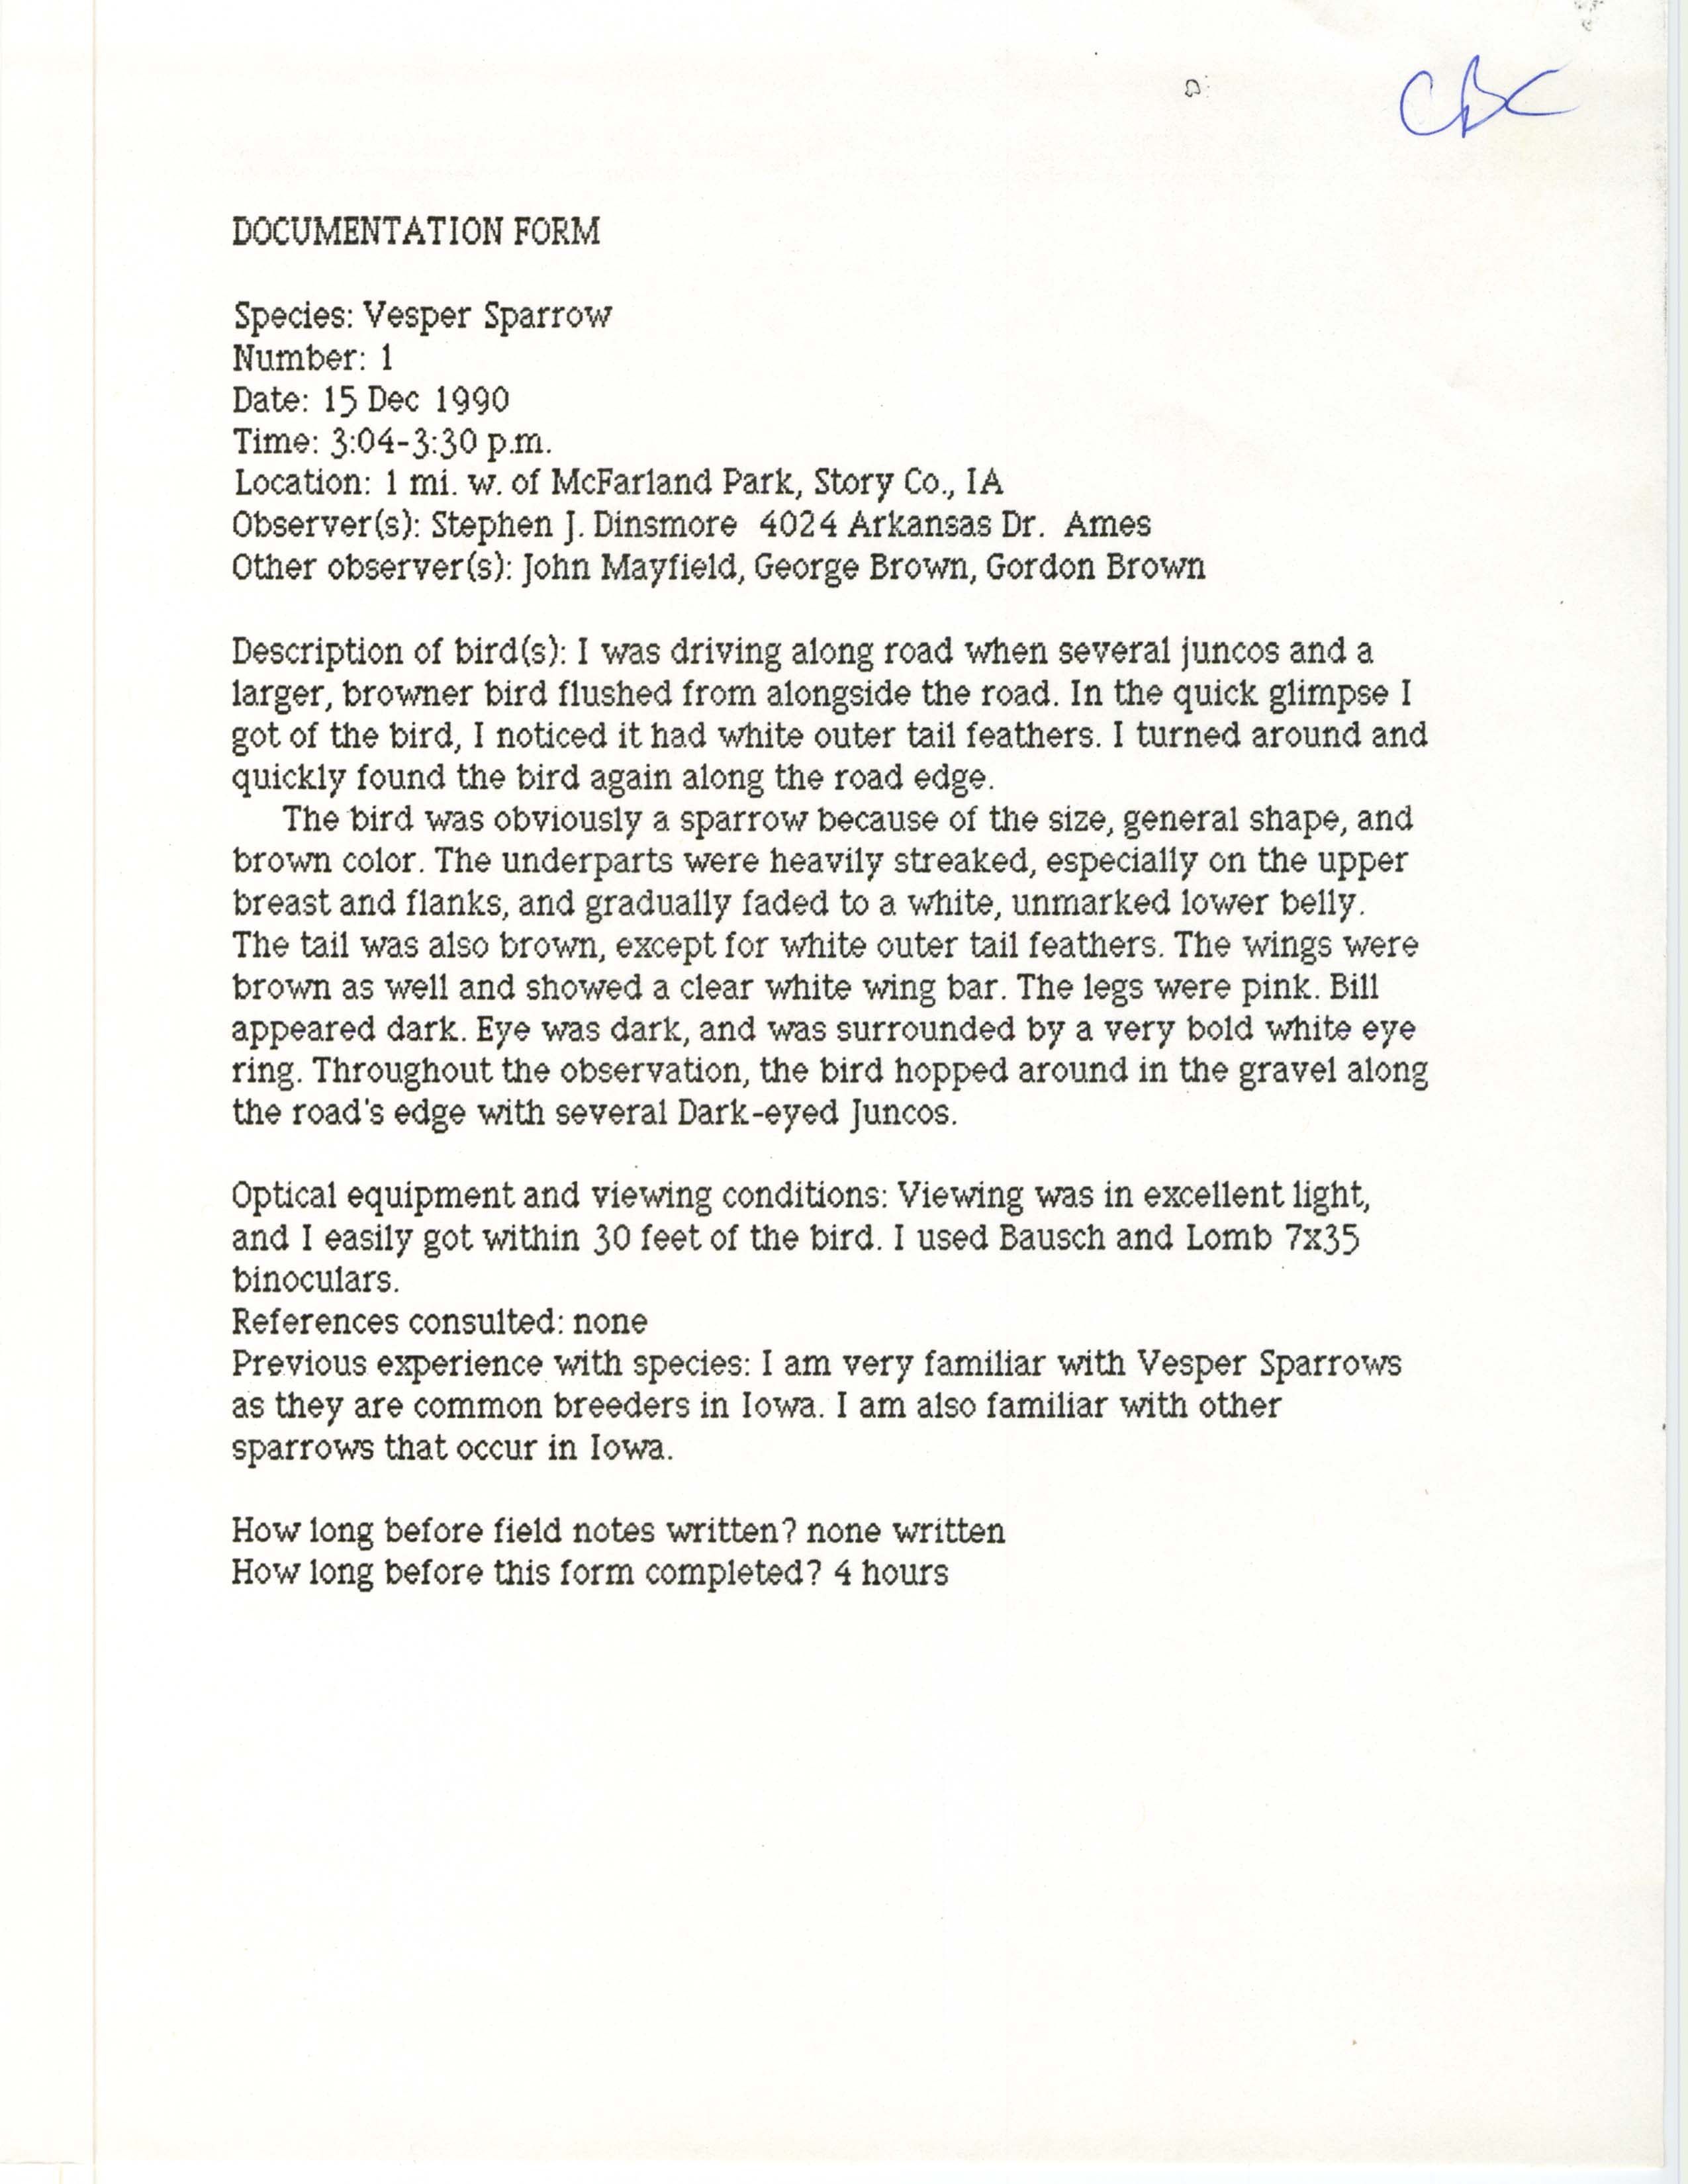 Rare bird documentation form for Vesper Sparrow west of McFarland Park in Story County, 1990